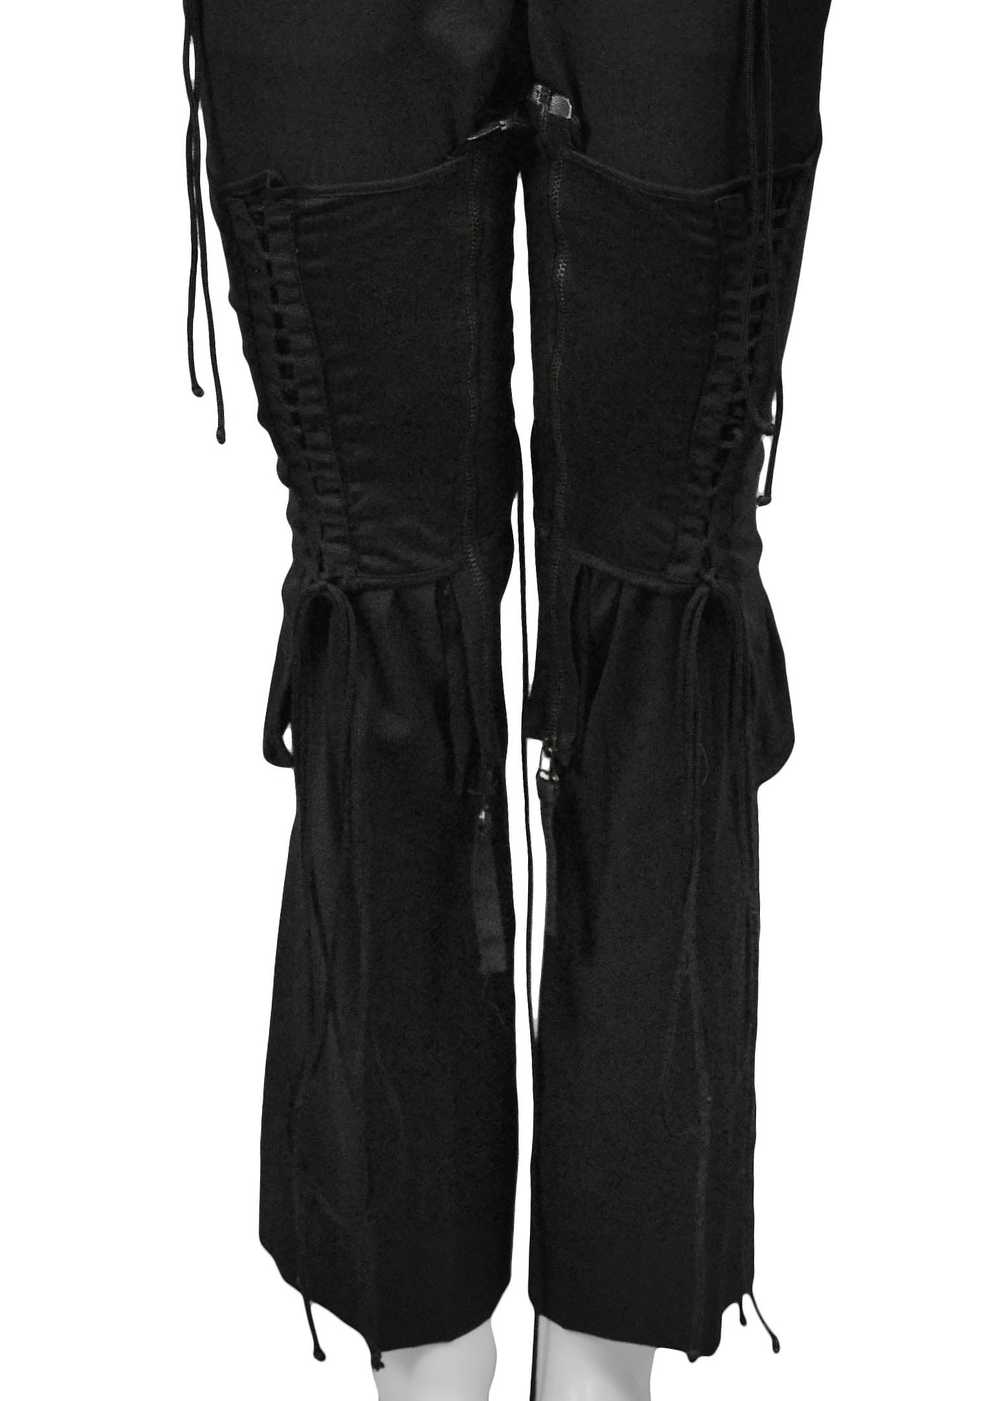 HELMUT LANG NAVY CORSET CHAPS AW 2003 - image 7